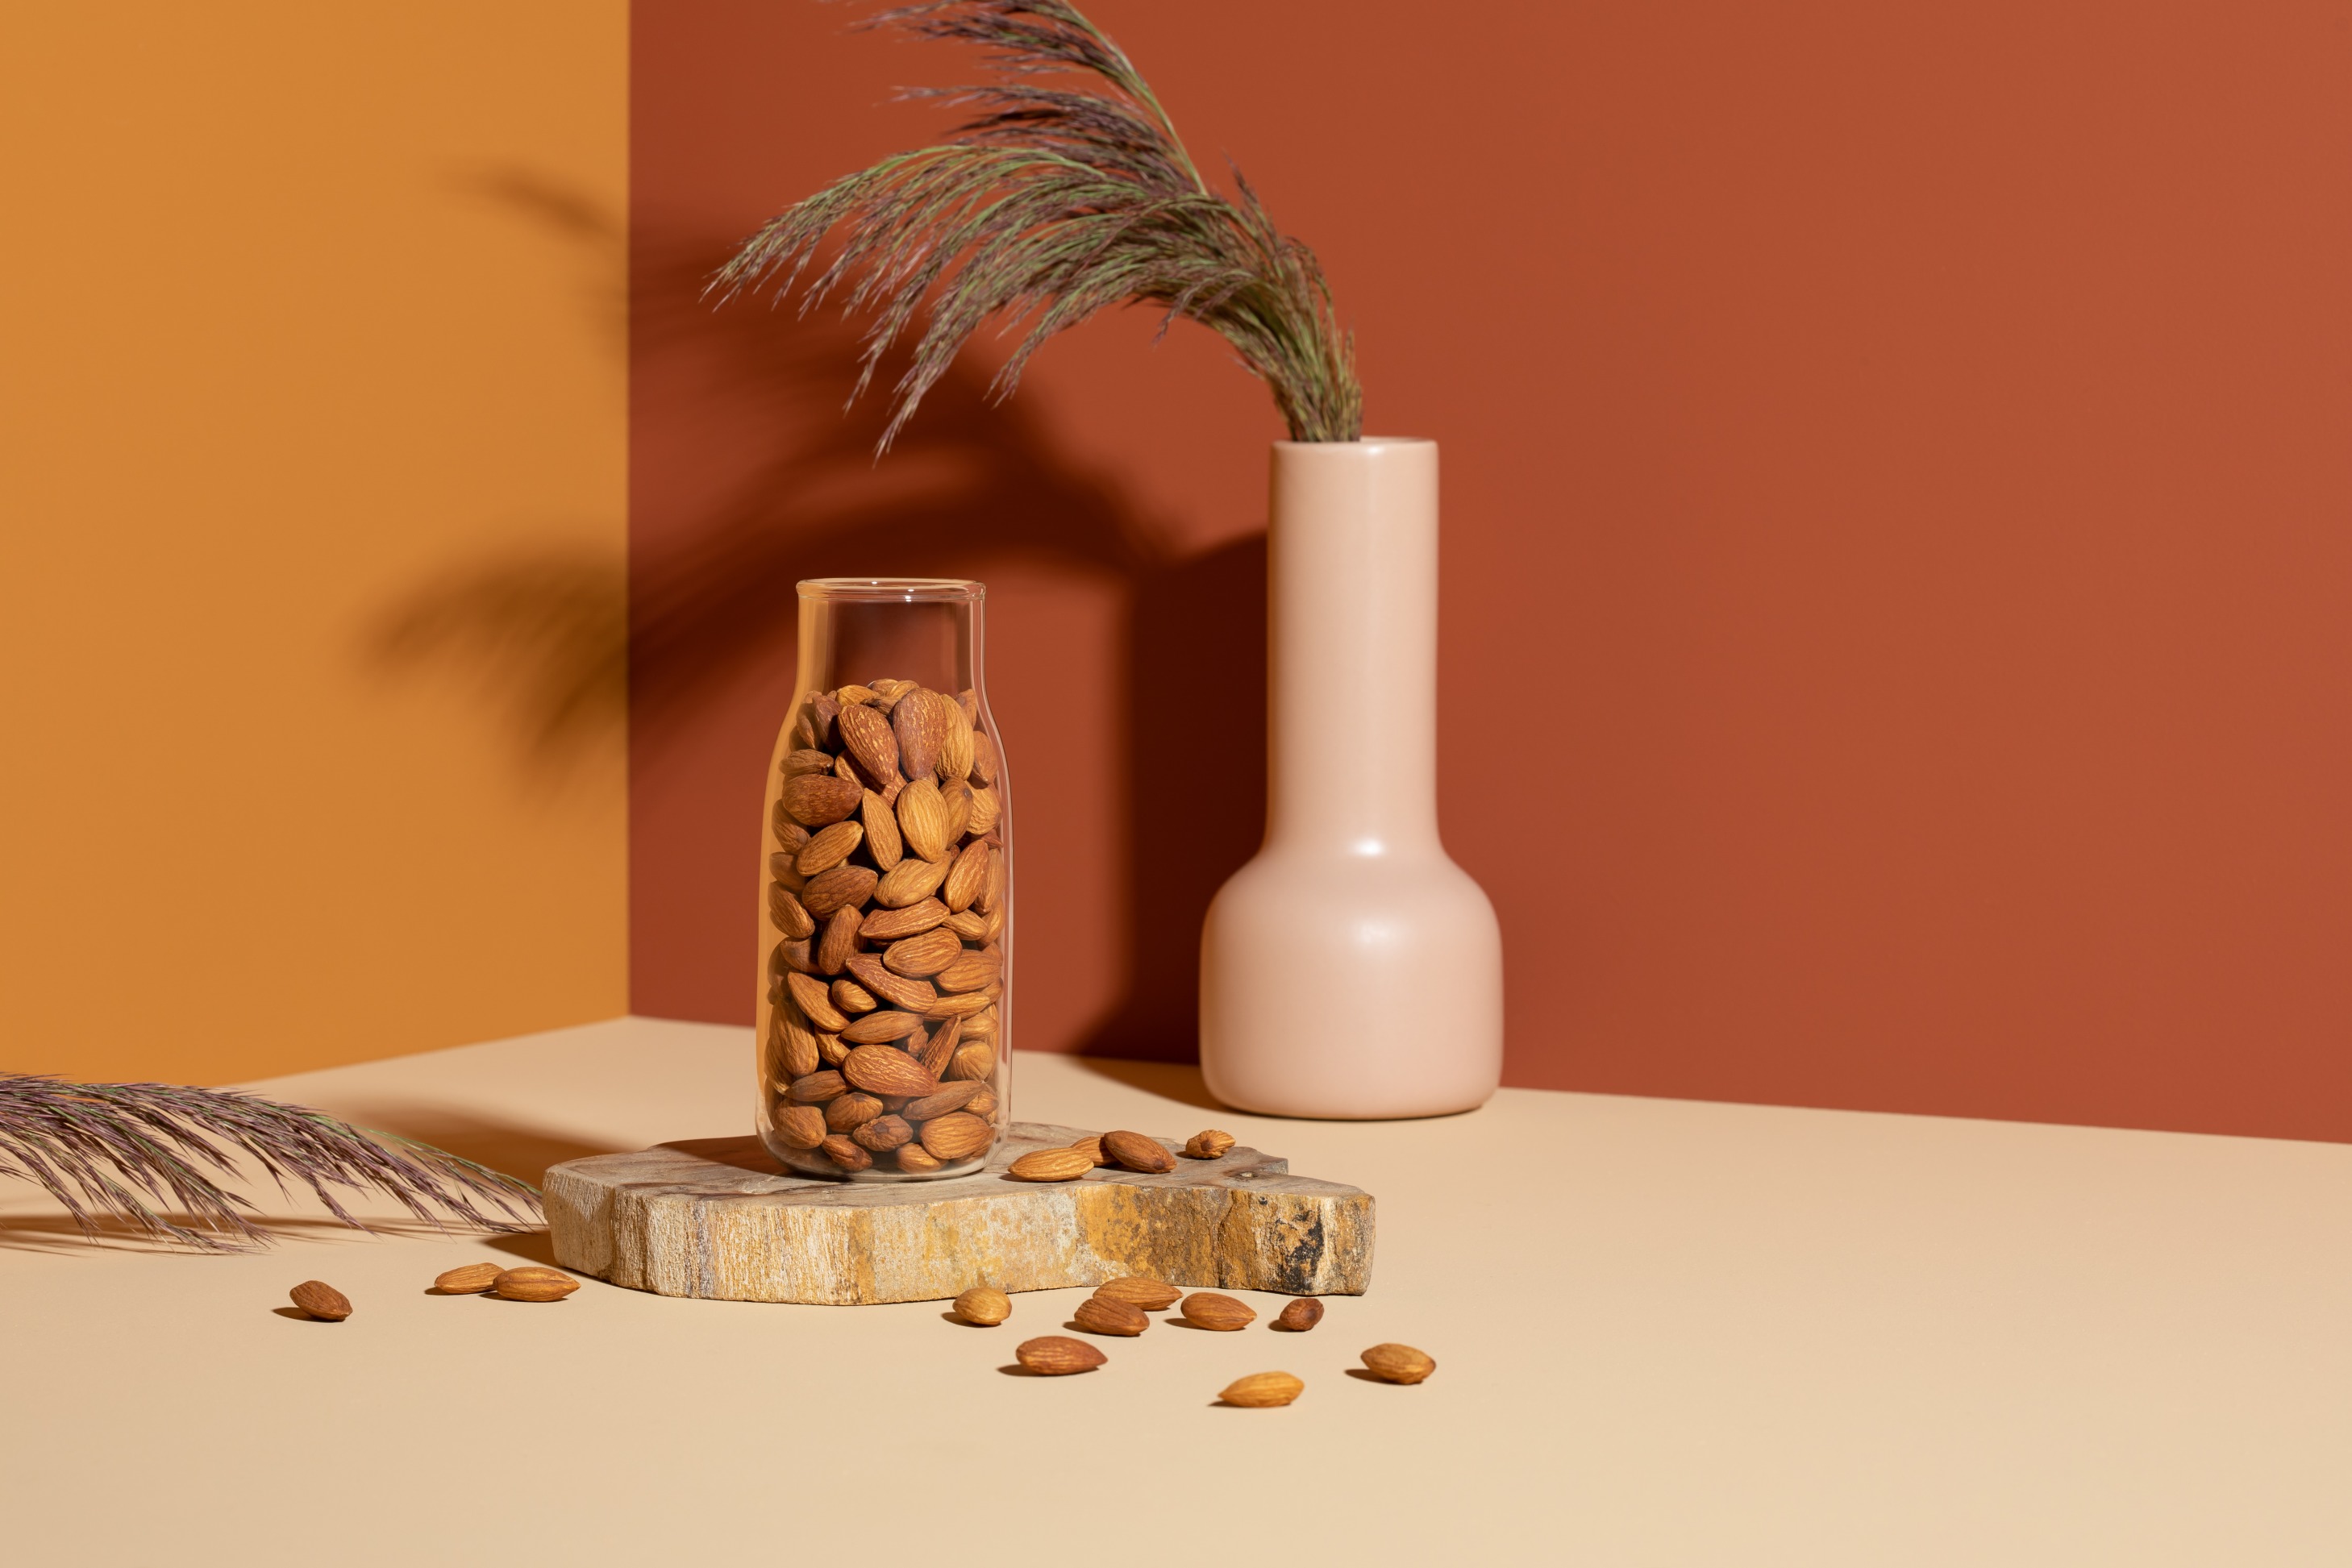 almond in a glass bottle with a brownish background behind